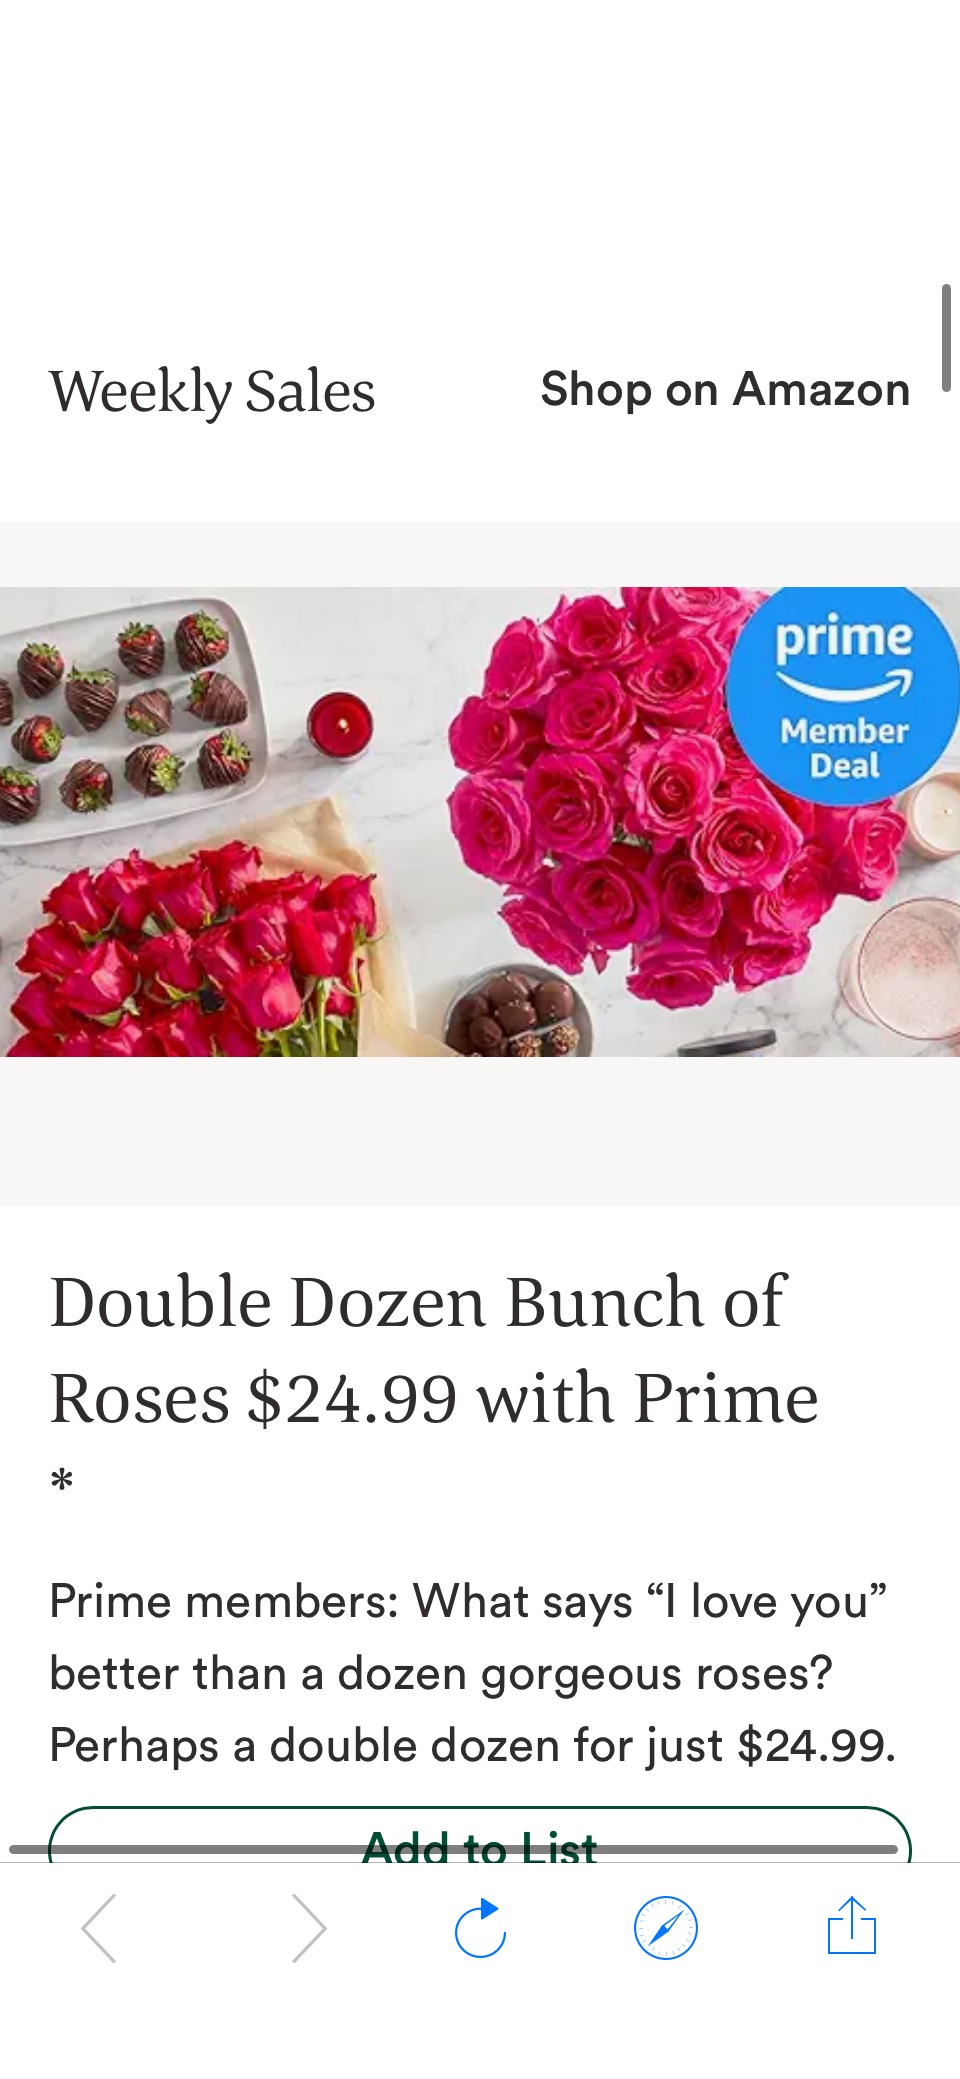 Double Dozen Bunch of Roses $24.99 with Prime